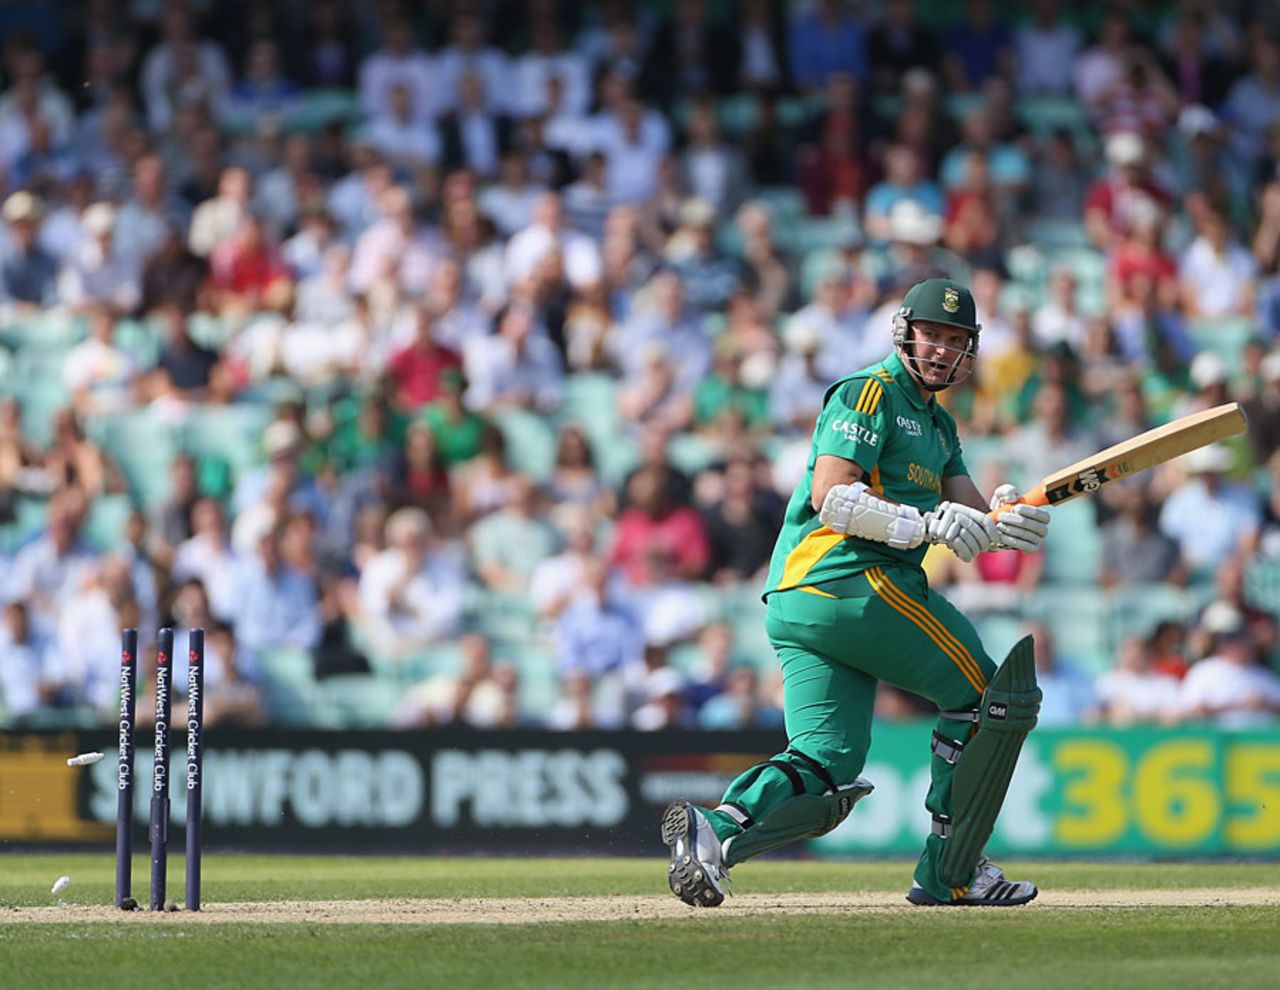 Graeme Smith missed a leg-side swish at James Anderson, England v South Africa, 3rd NatWest ODI, The Oval, August 31, 2012